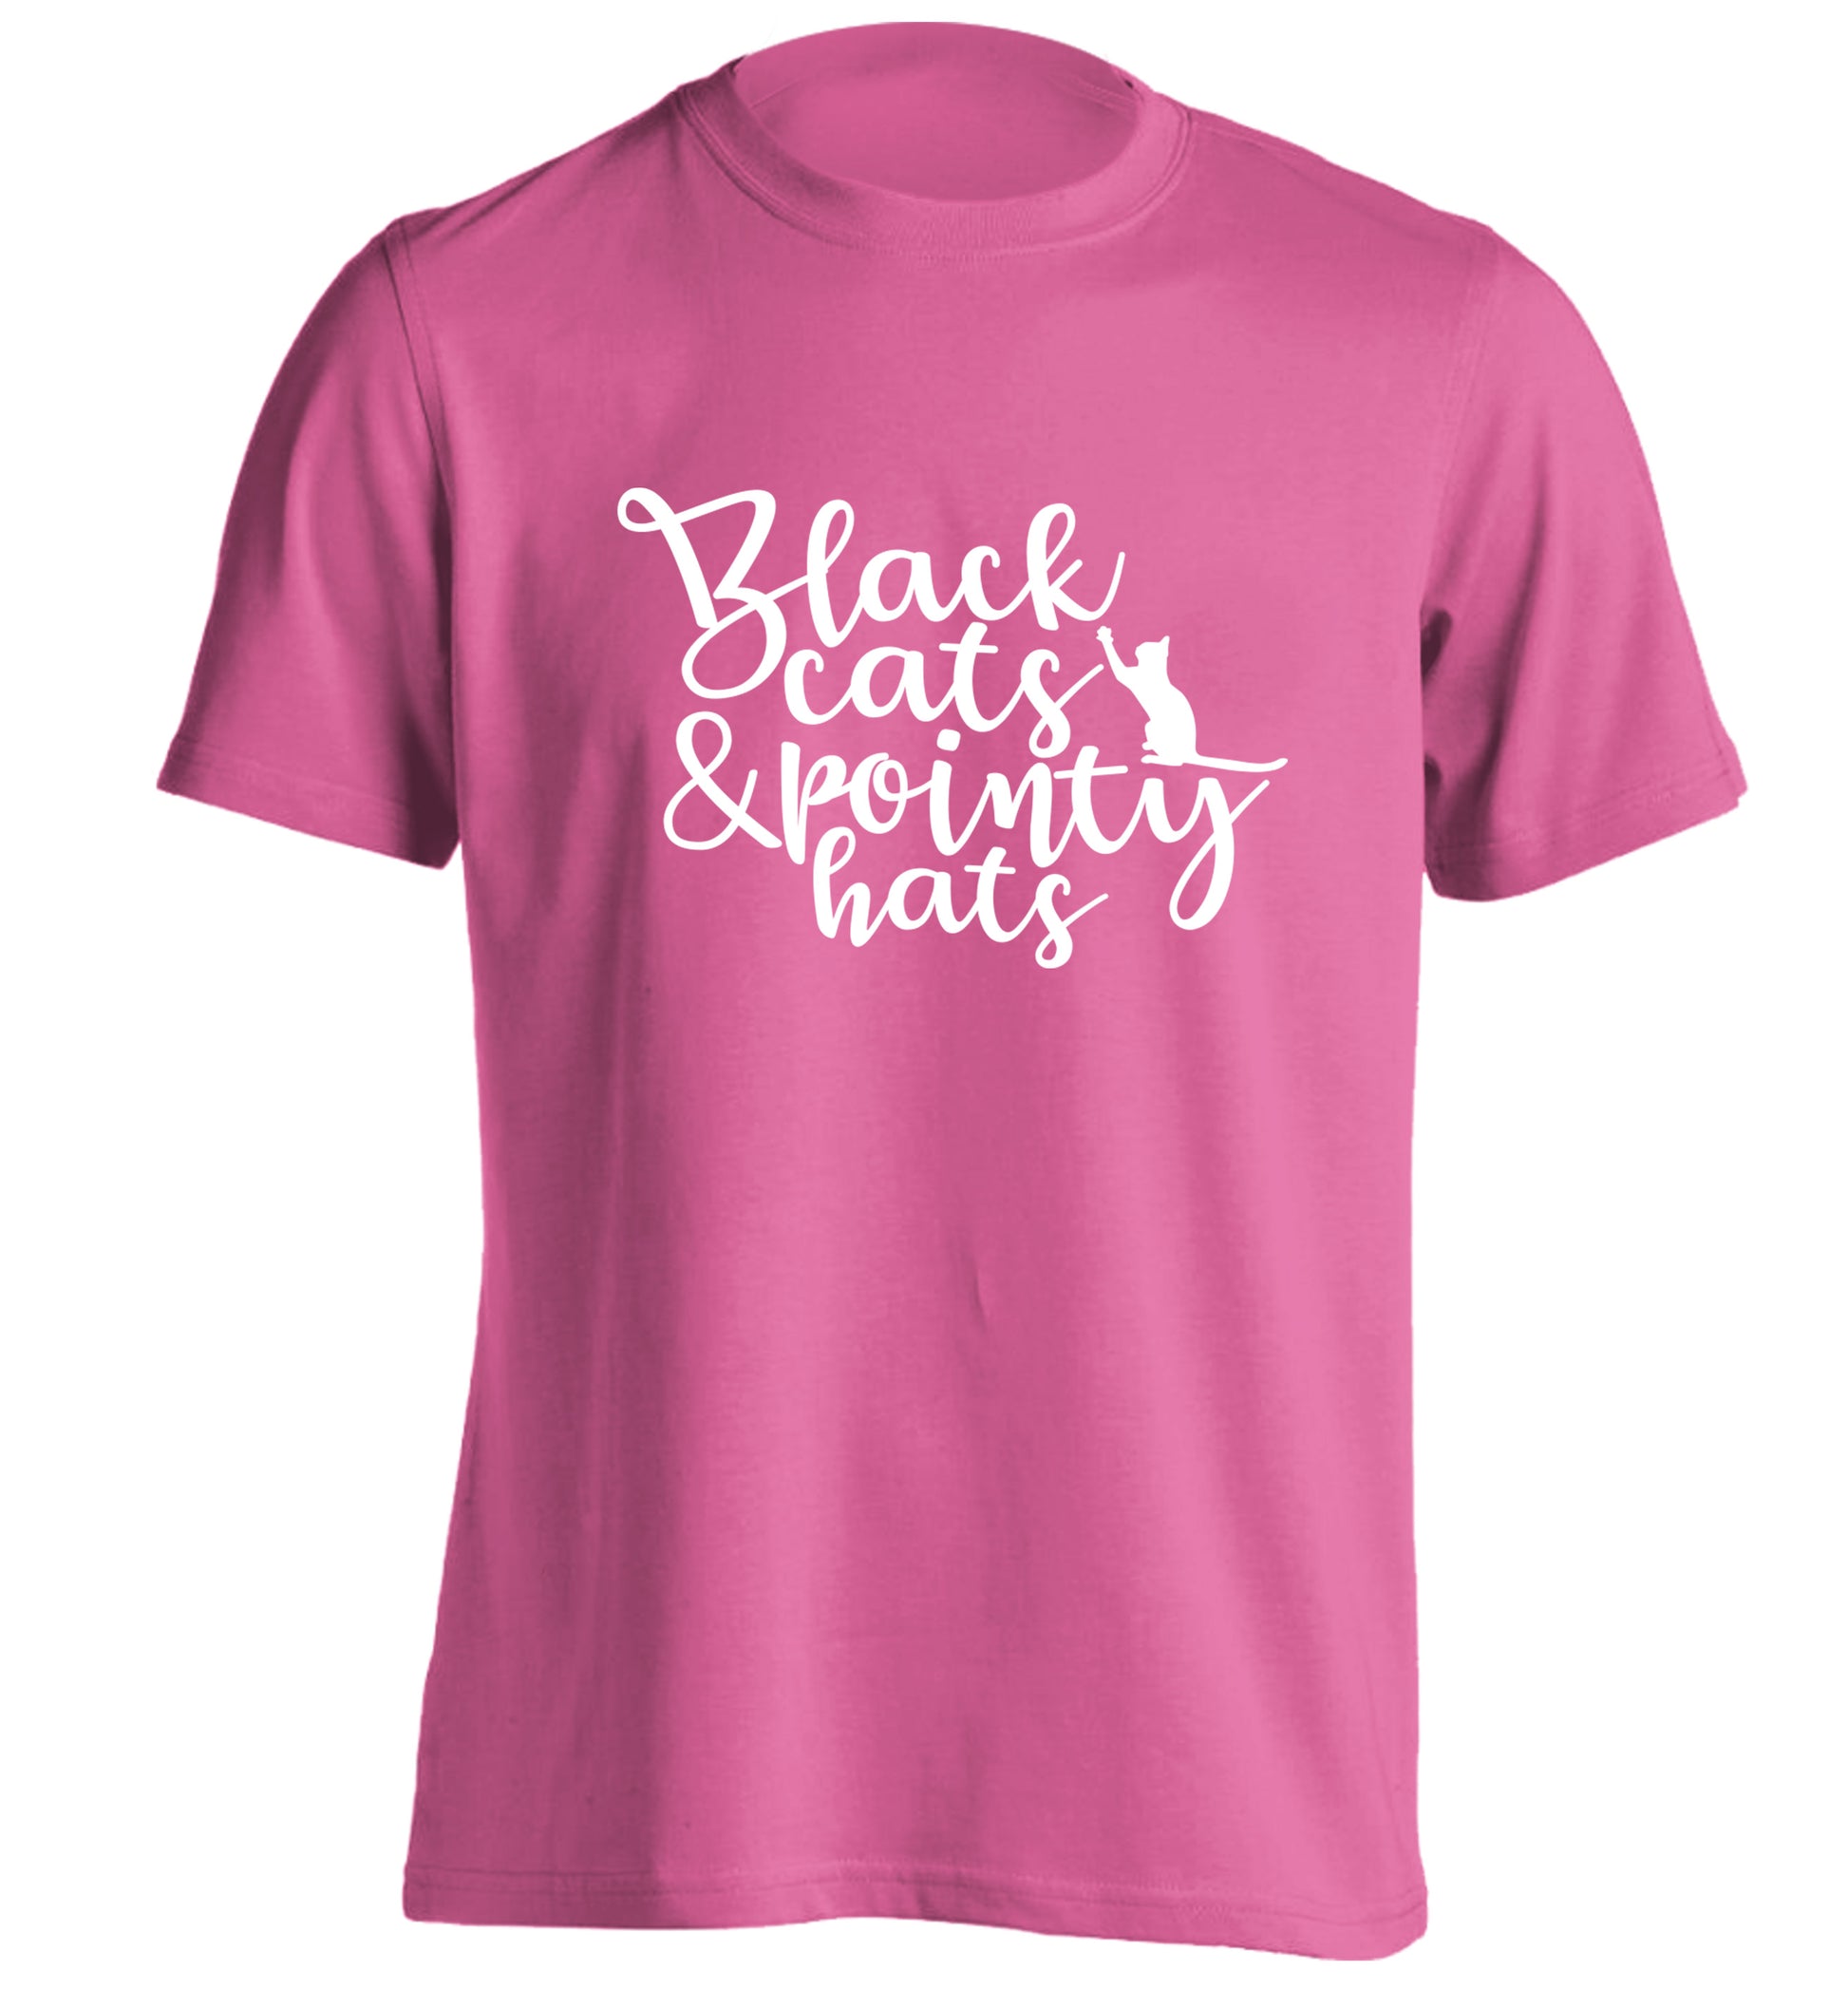 Black cats and pointy hats adults unisex pink Tshirt 2XL